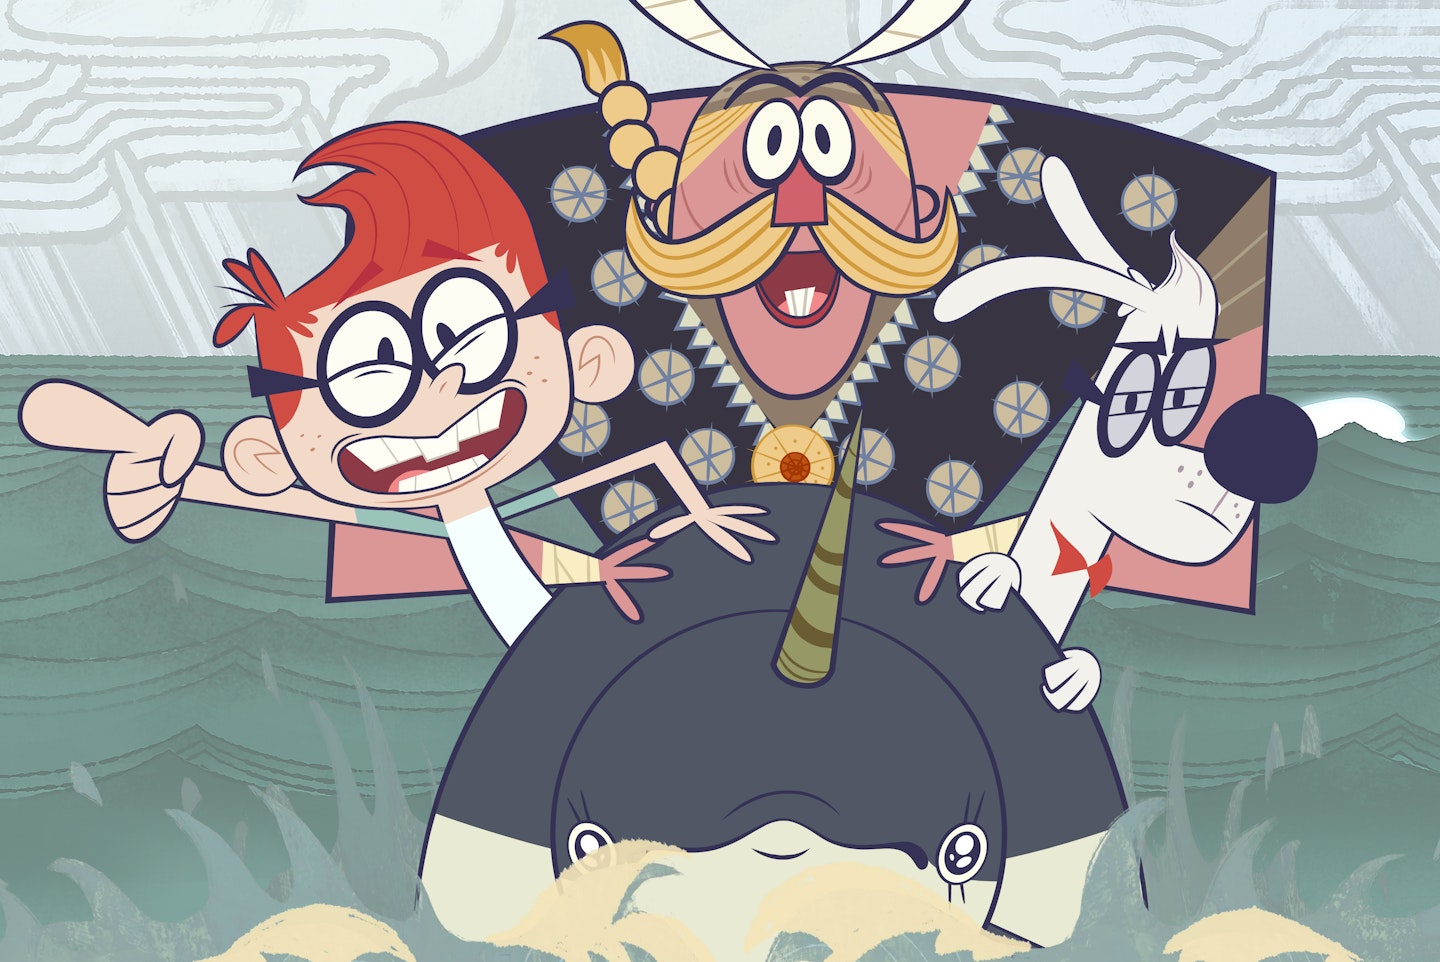 The Mr Peabody and Sherman Show